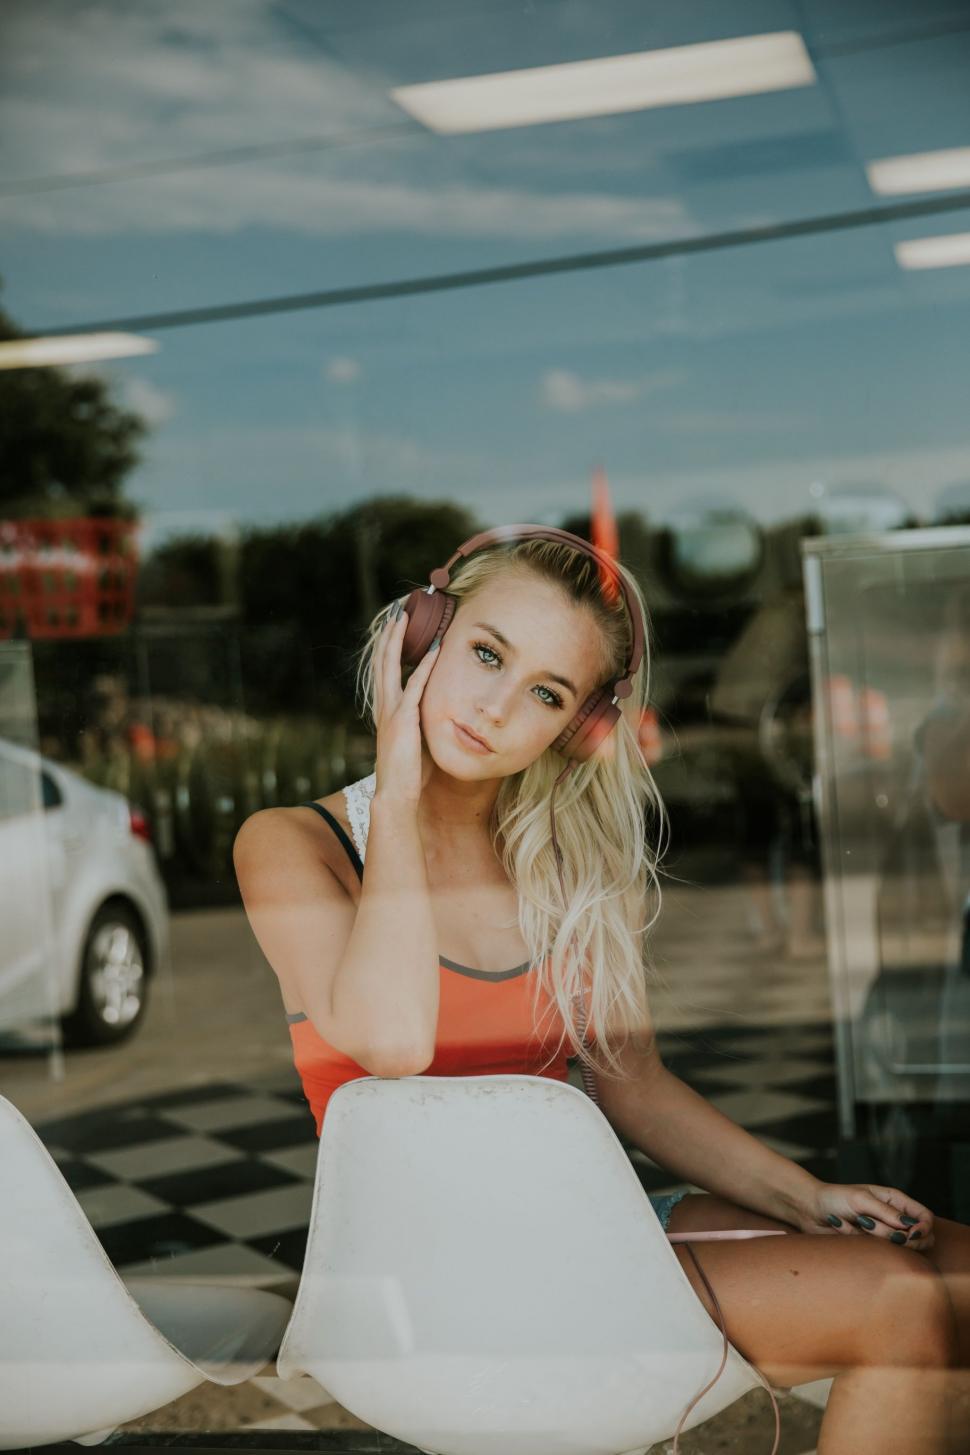 Free Image of Woman with Headphones in a restaurant 